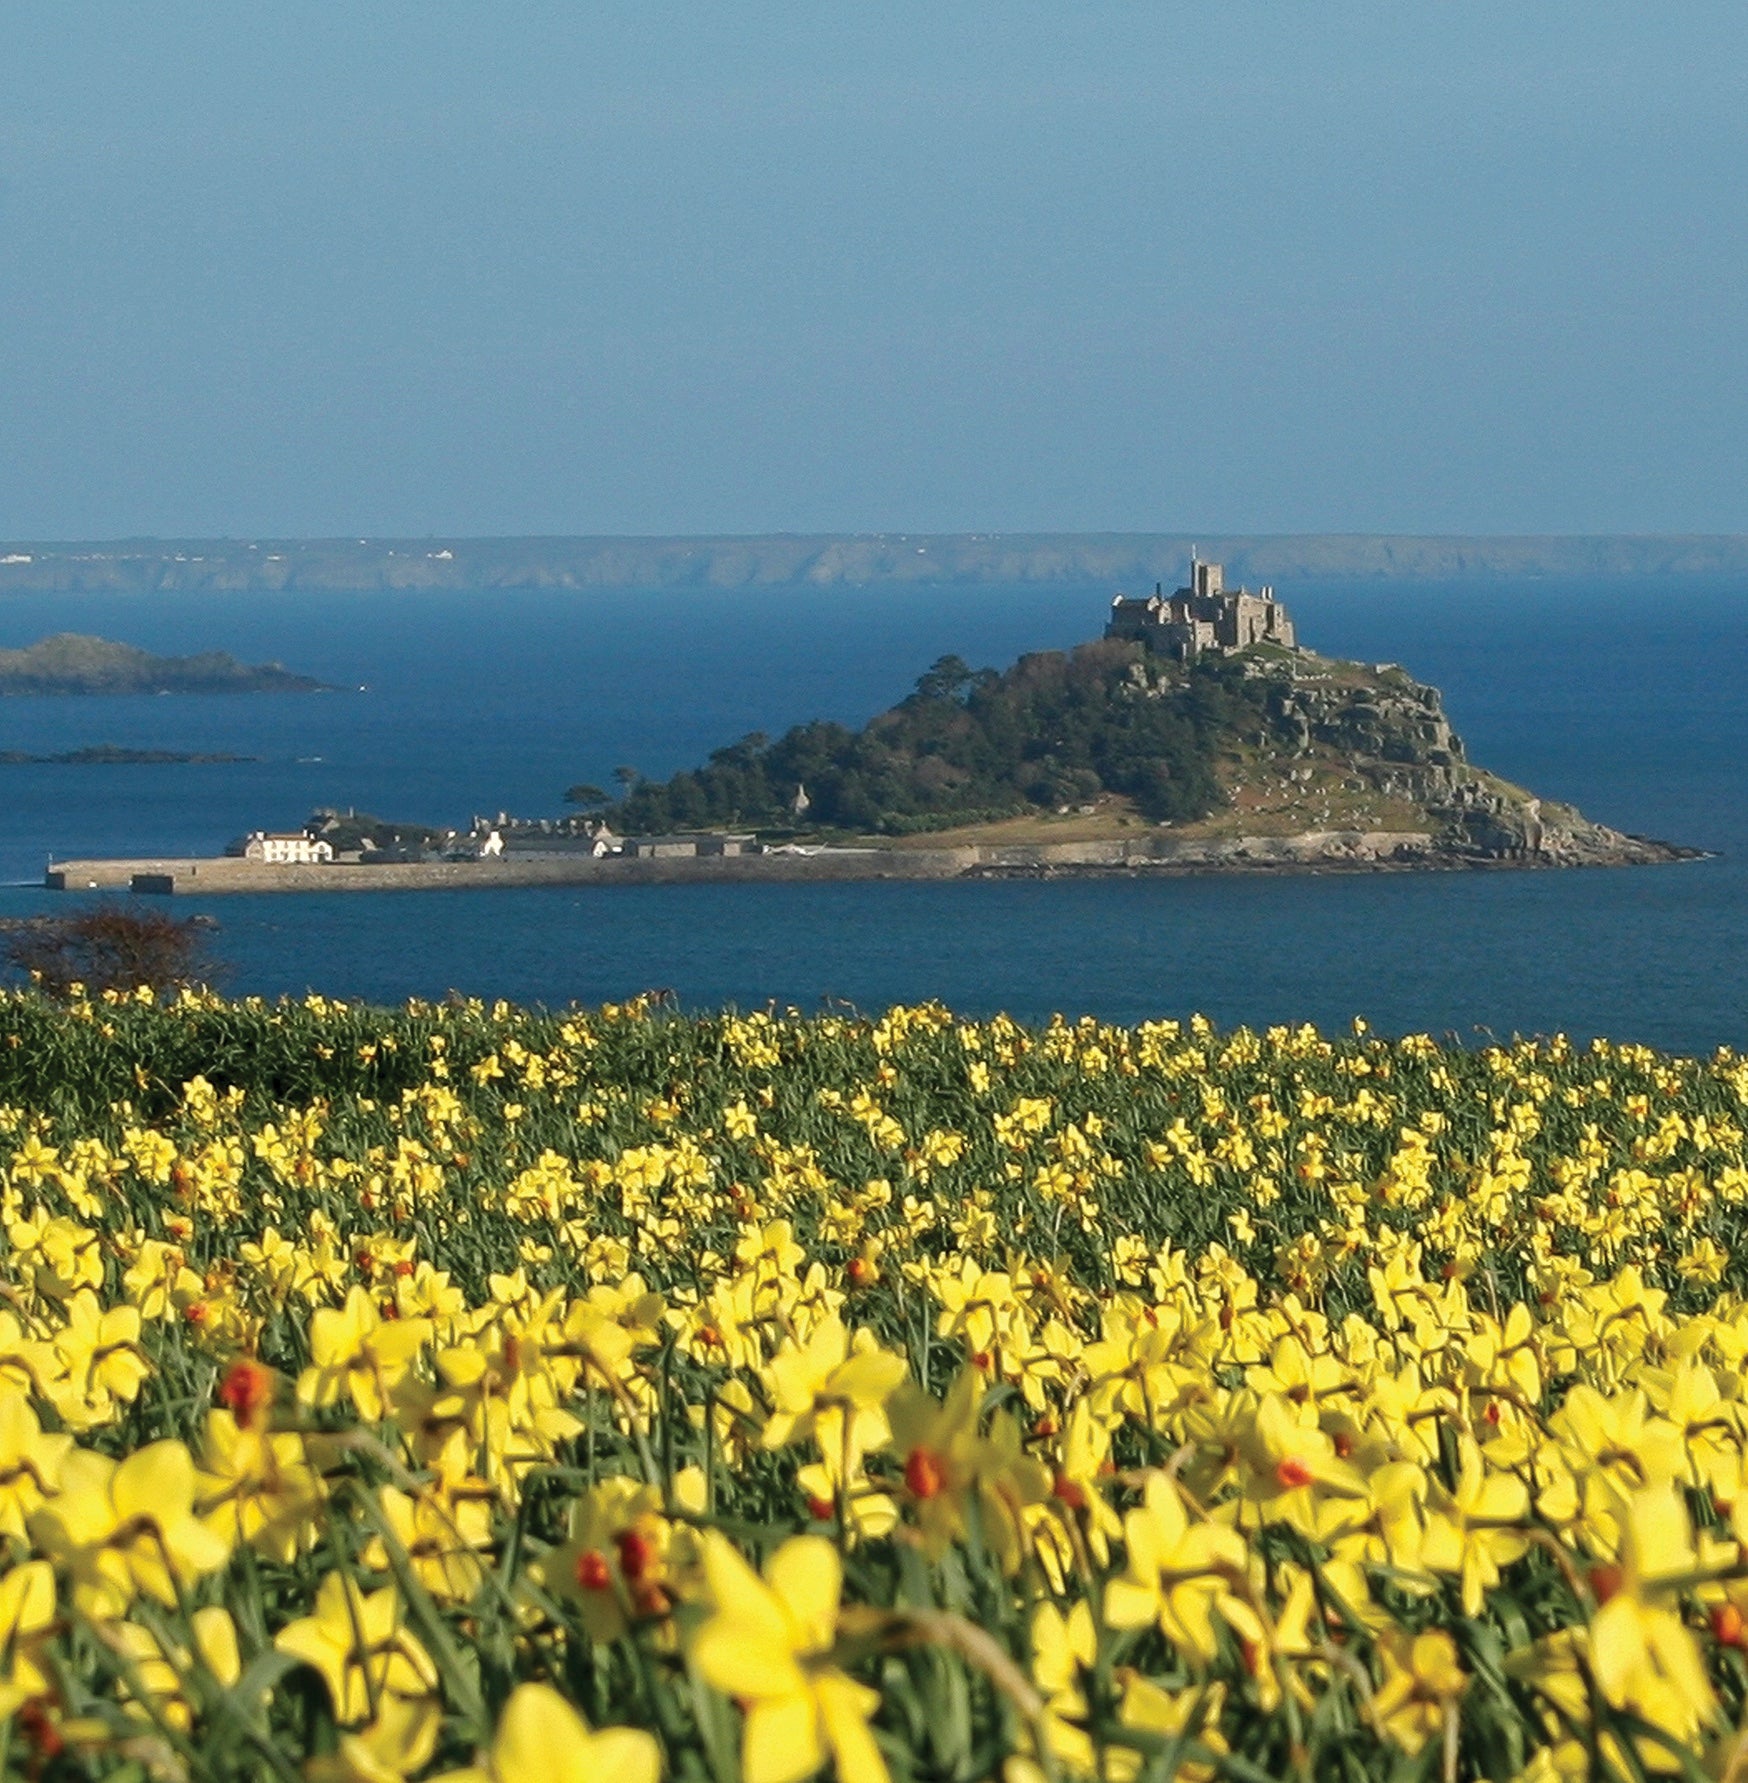 Cornish greetings card image of St Michael's Mount with a field of daffodils in the foreground, on a beautiful day